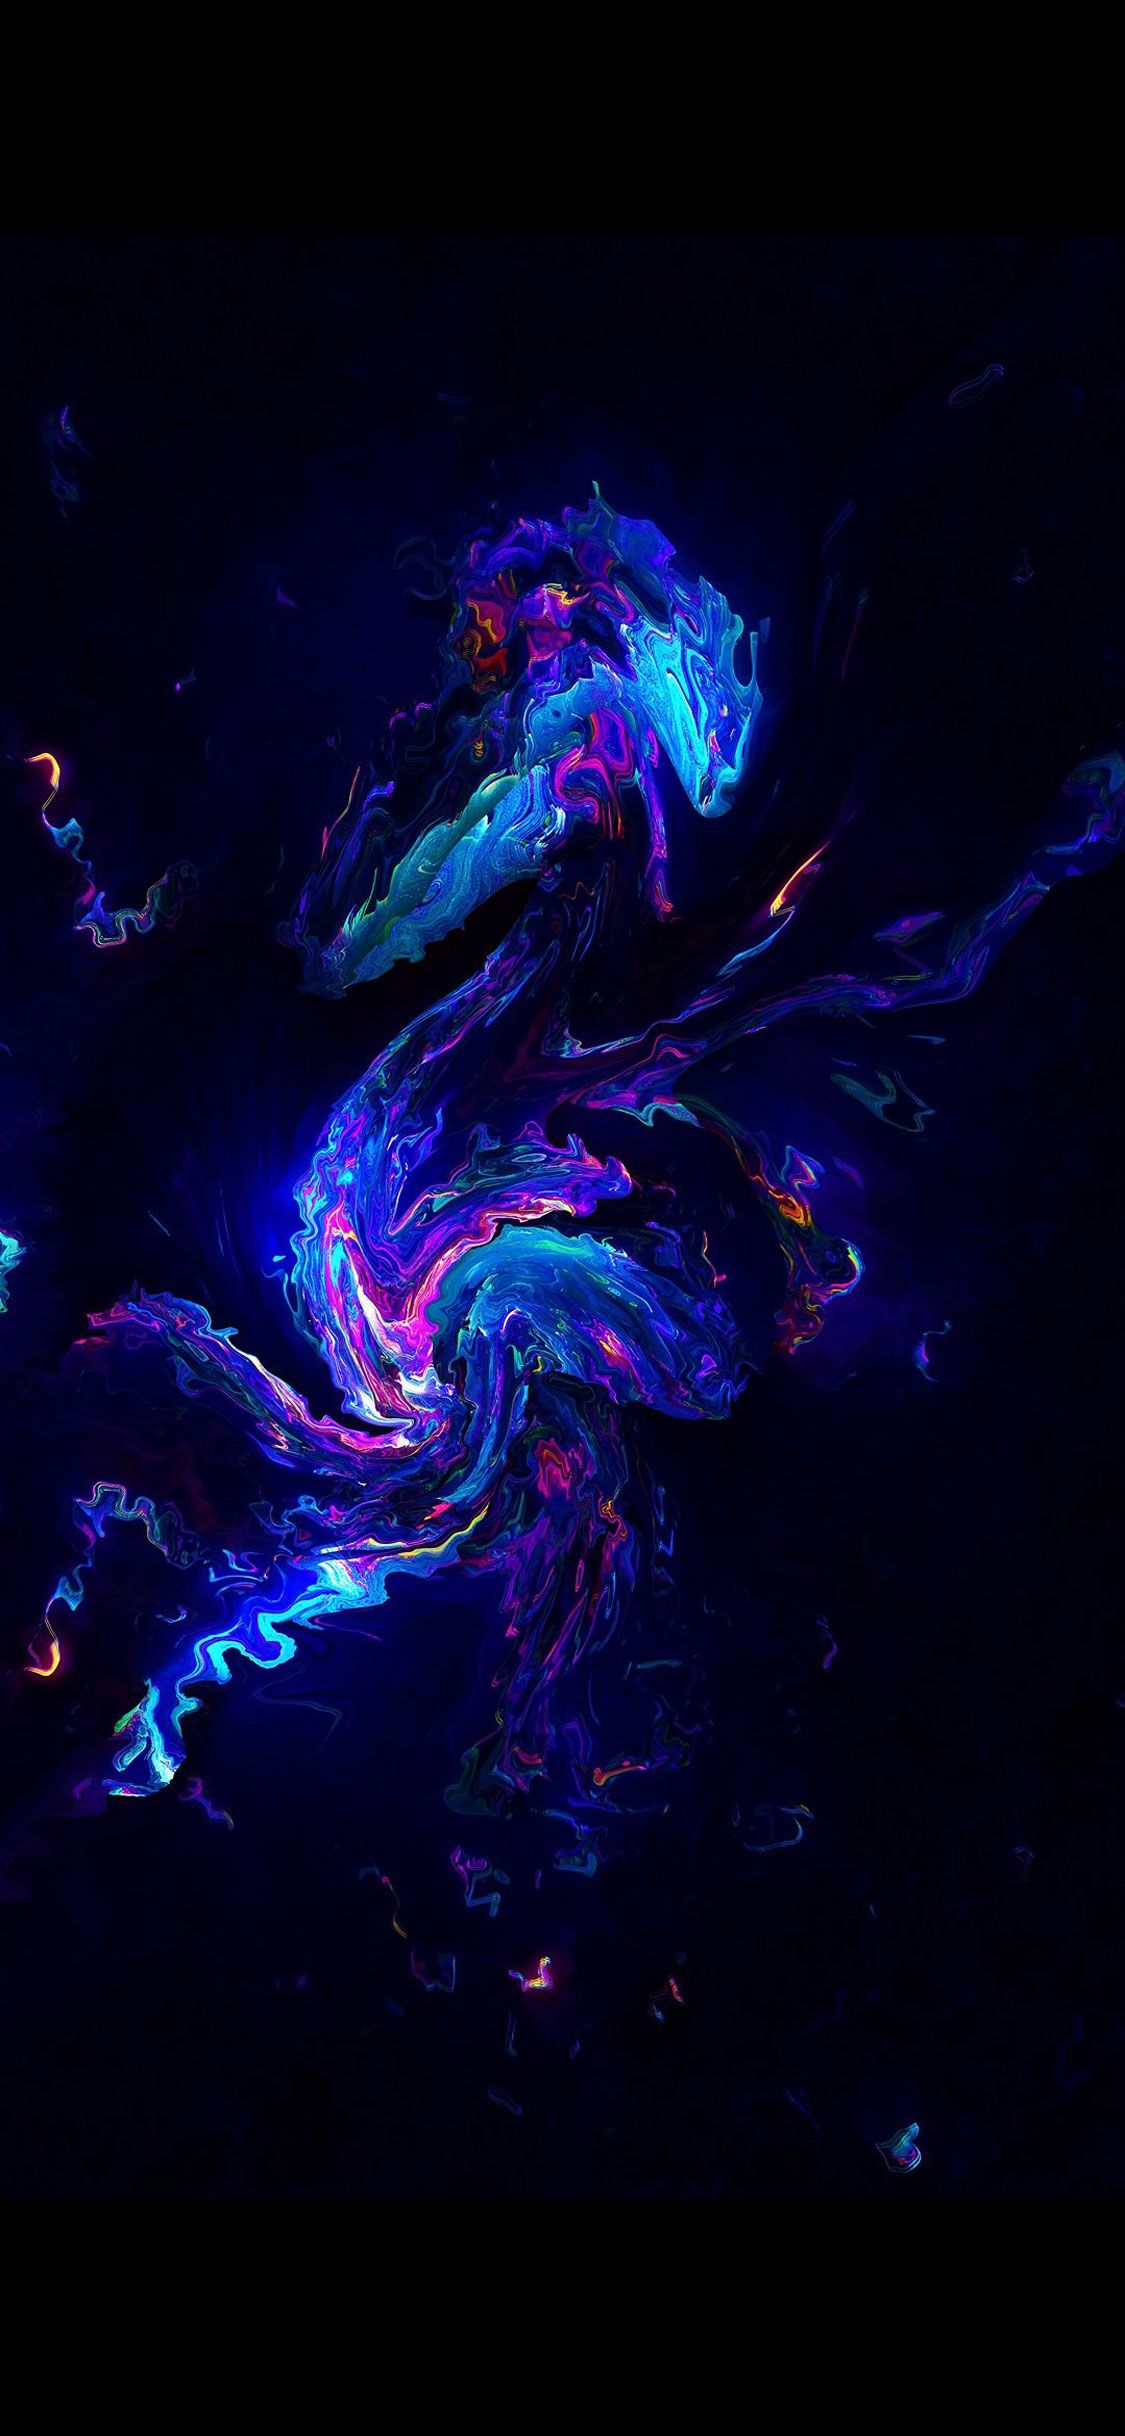 Coolest iPhone Wallpapers on WallpaperDog